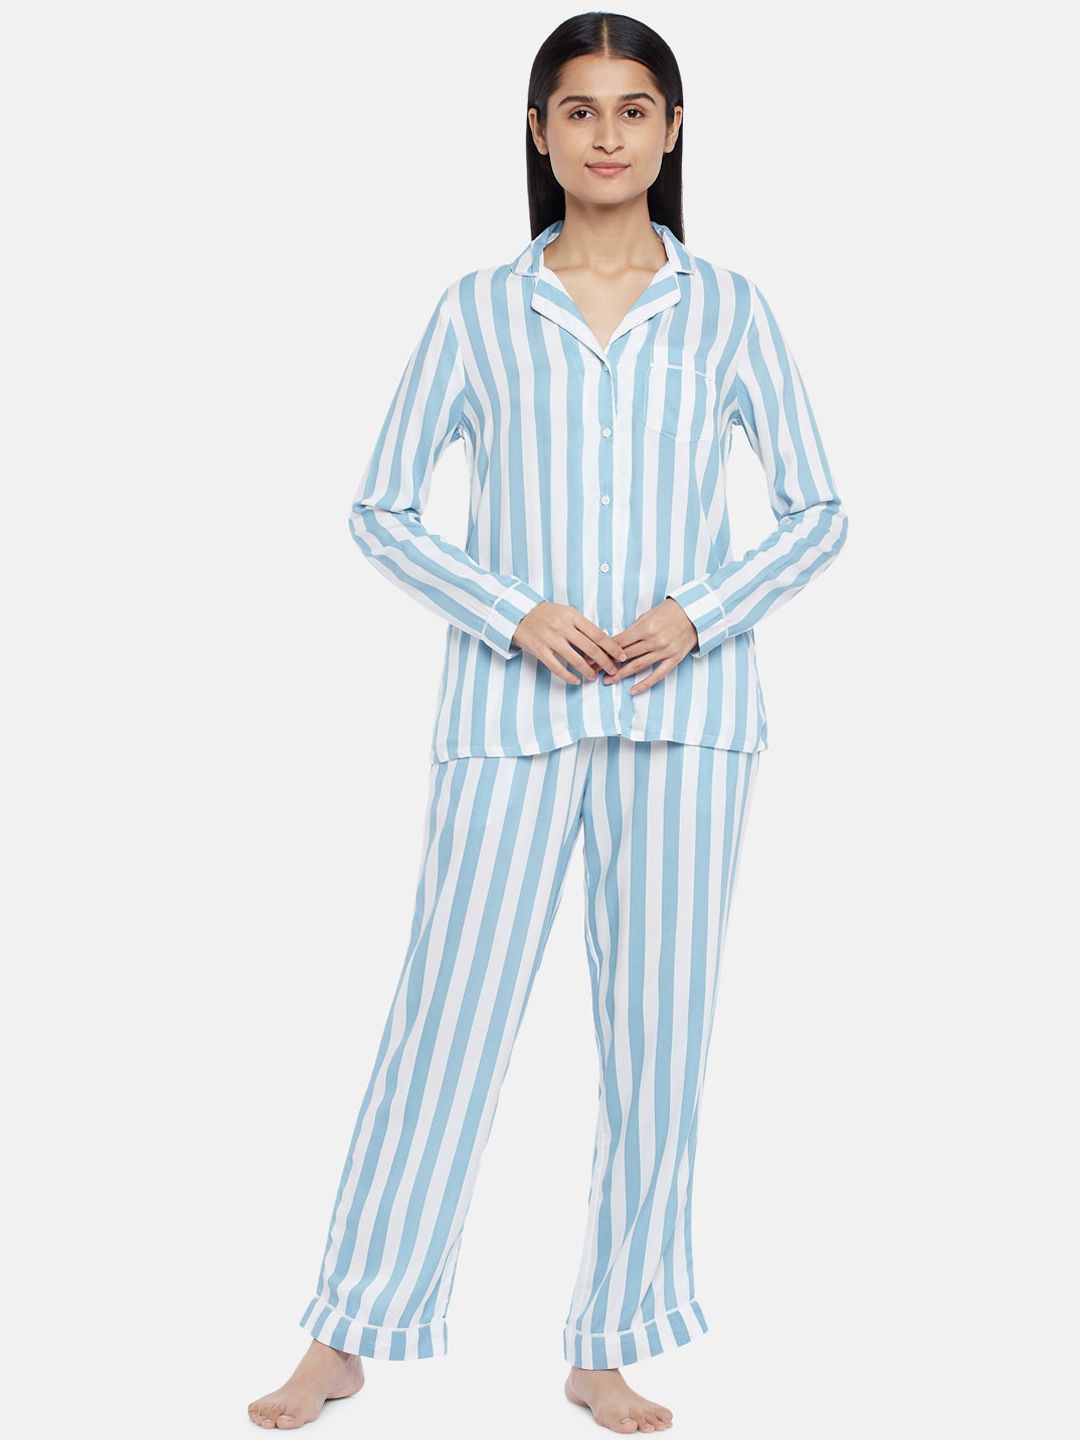 Dreamz by Pantaloons Women Blue & White Printed Night suit Price in India